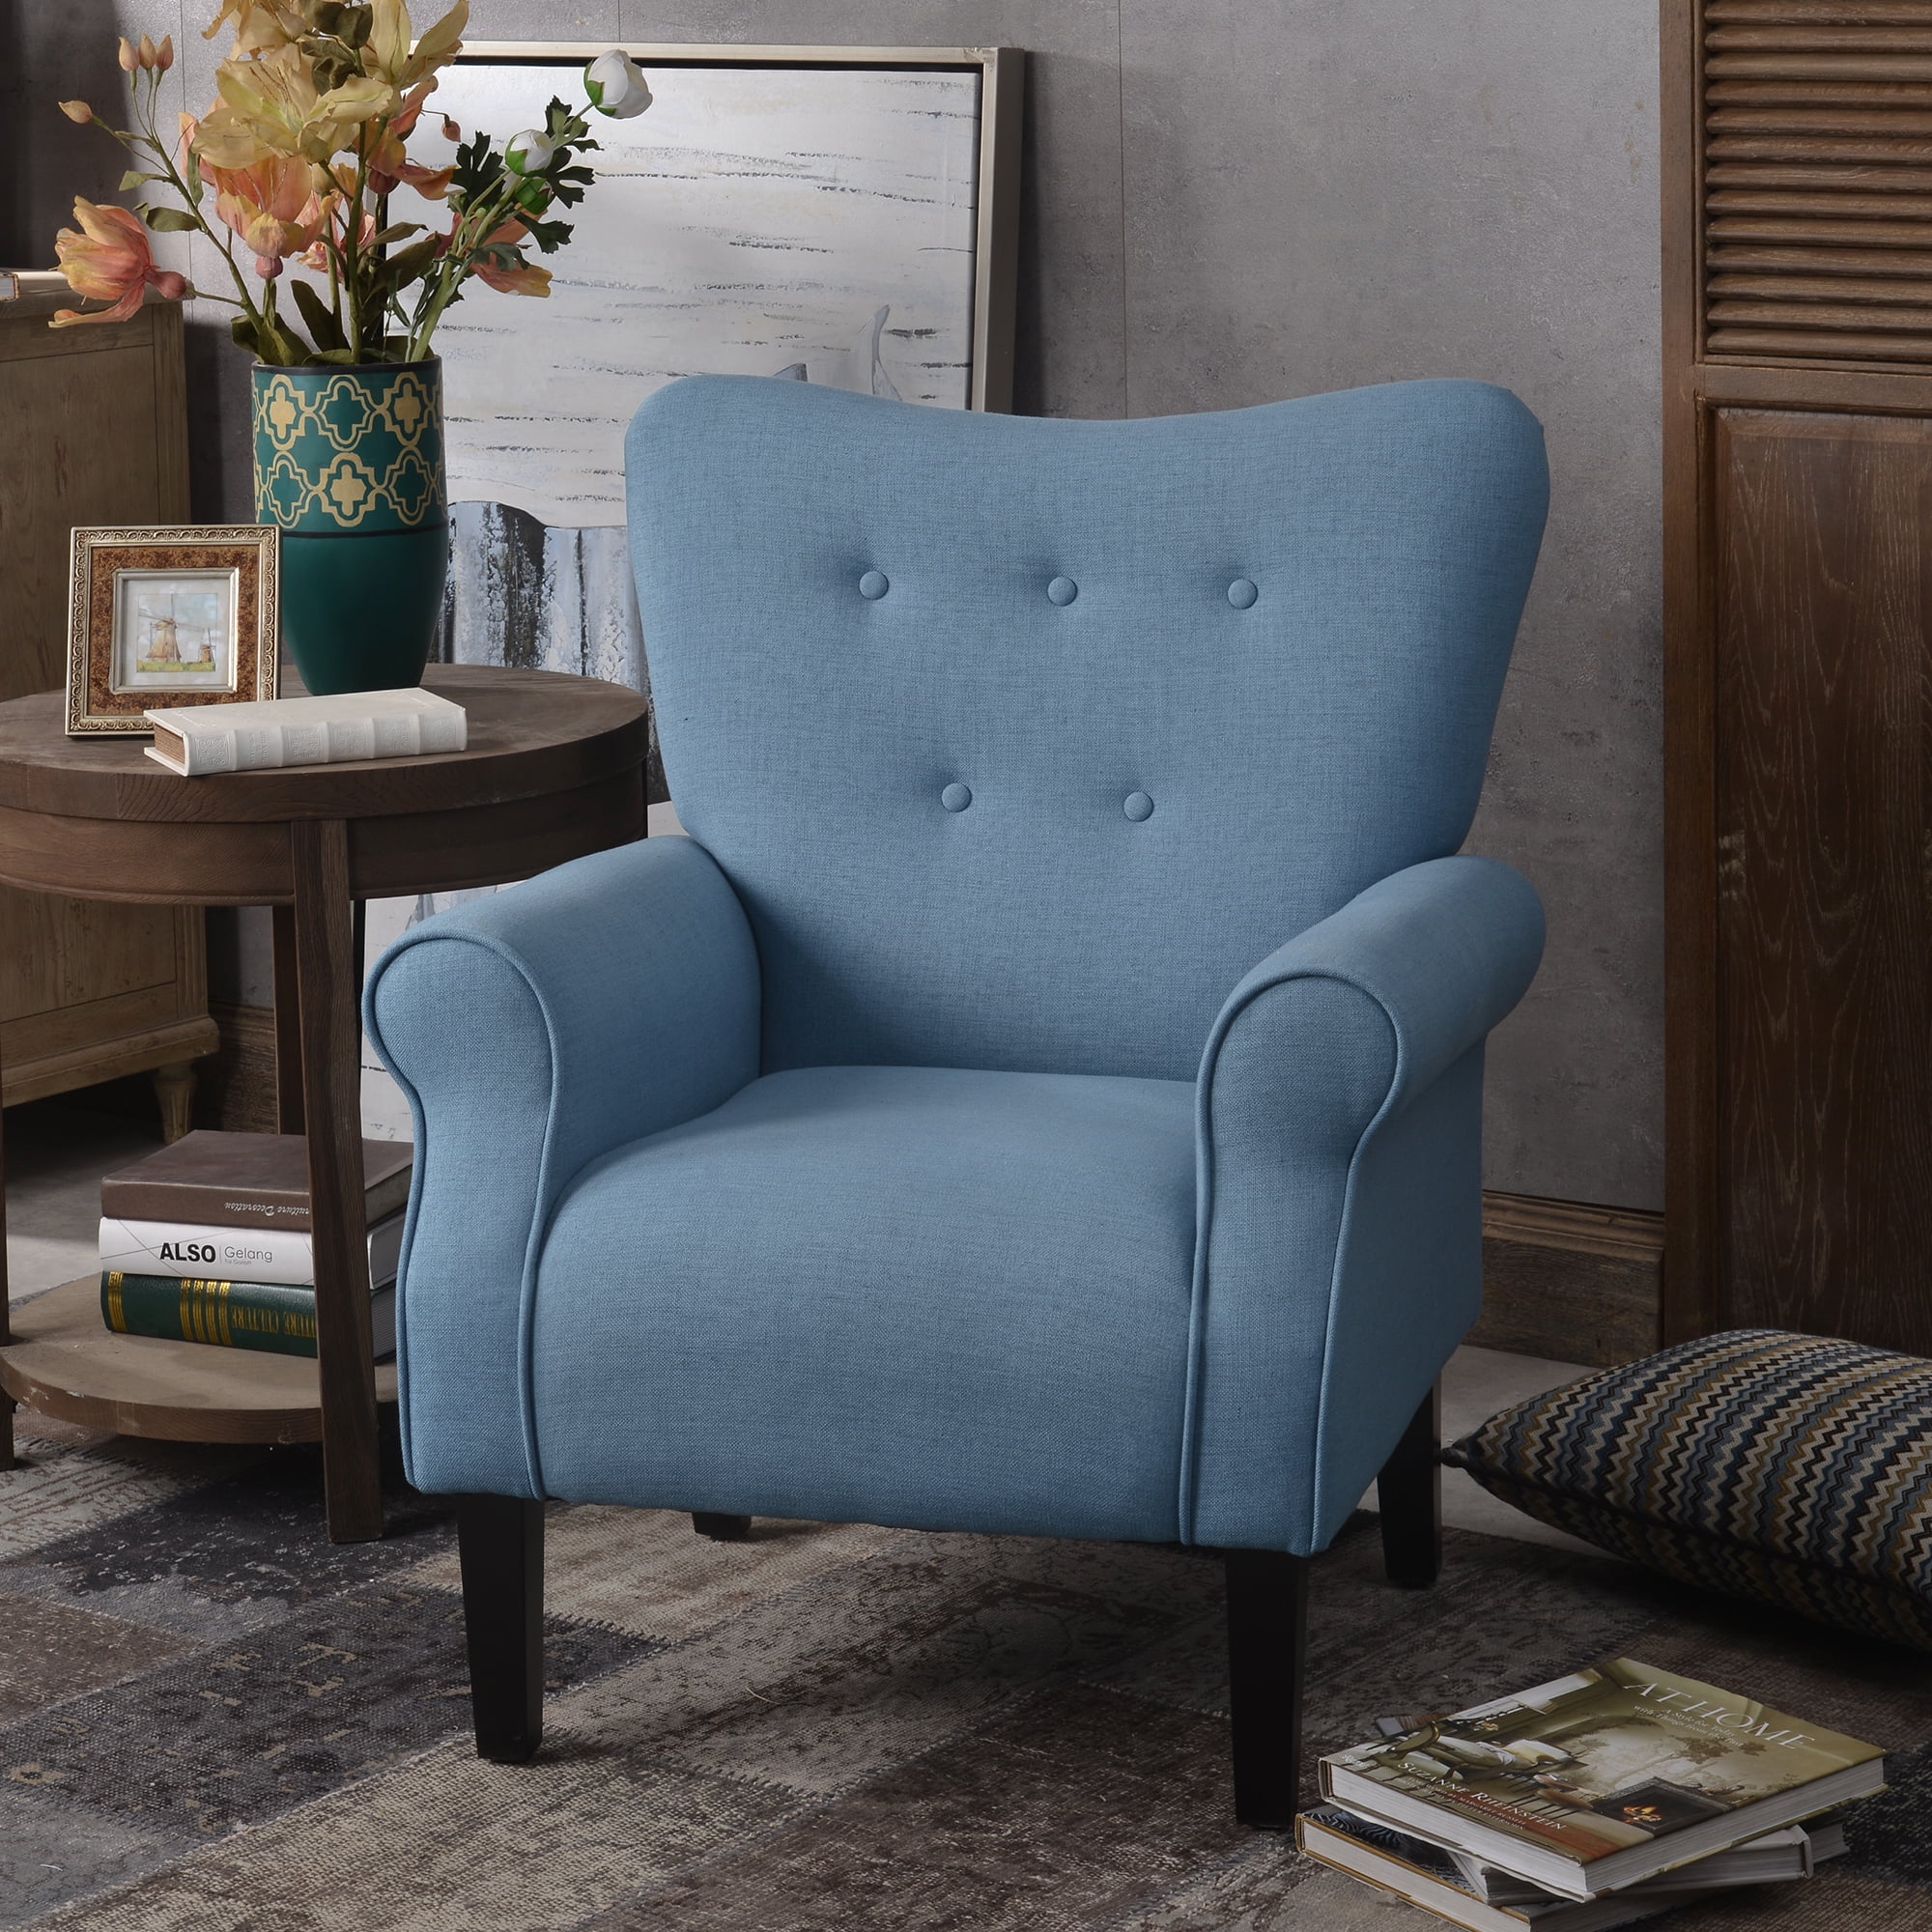 Tufted Accent Chair With Wooden Legs, Blue Accent Chair Living Room